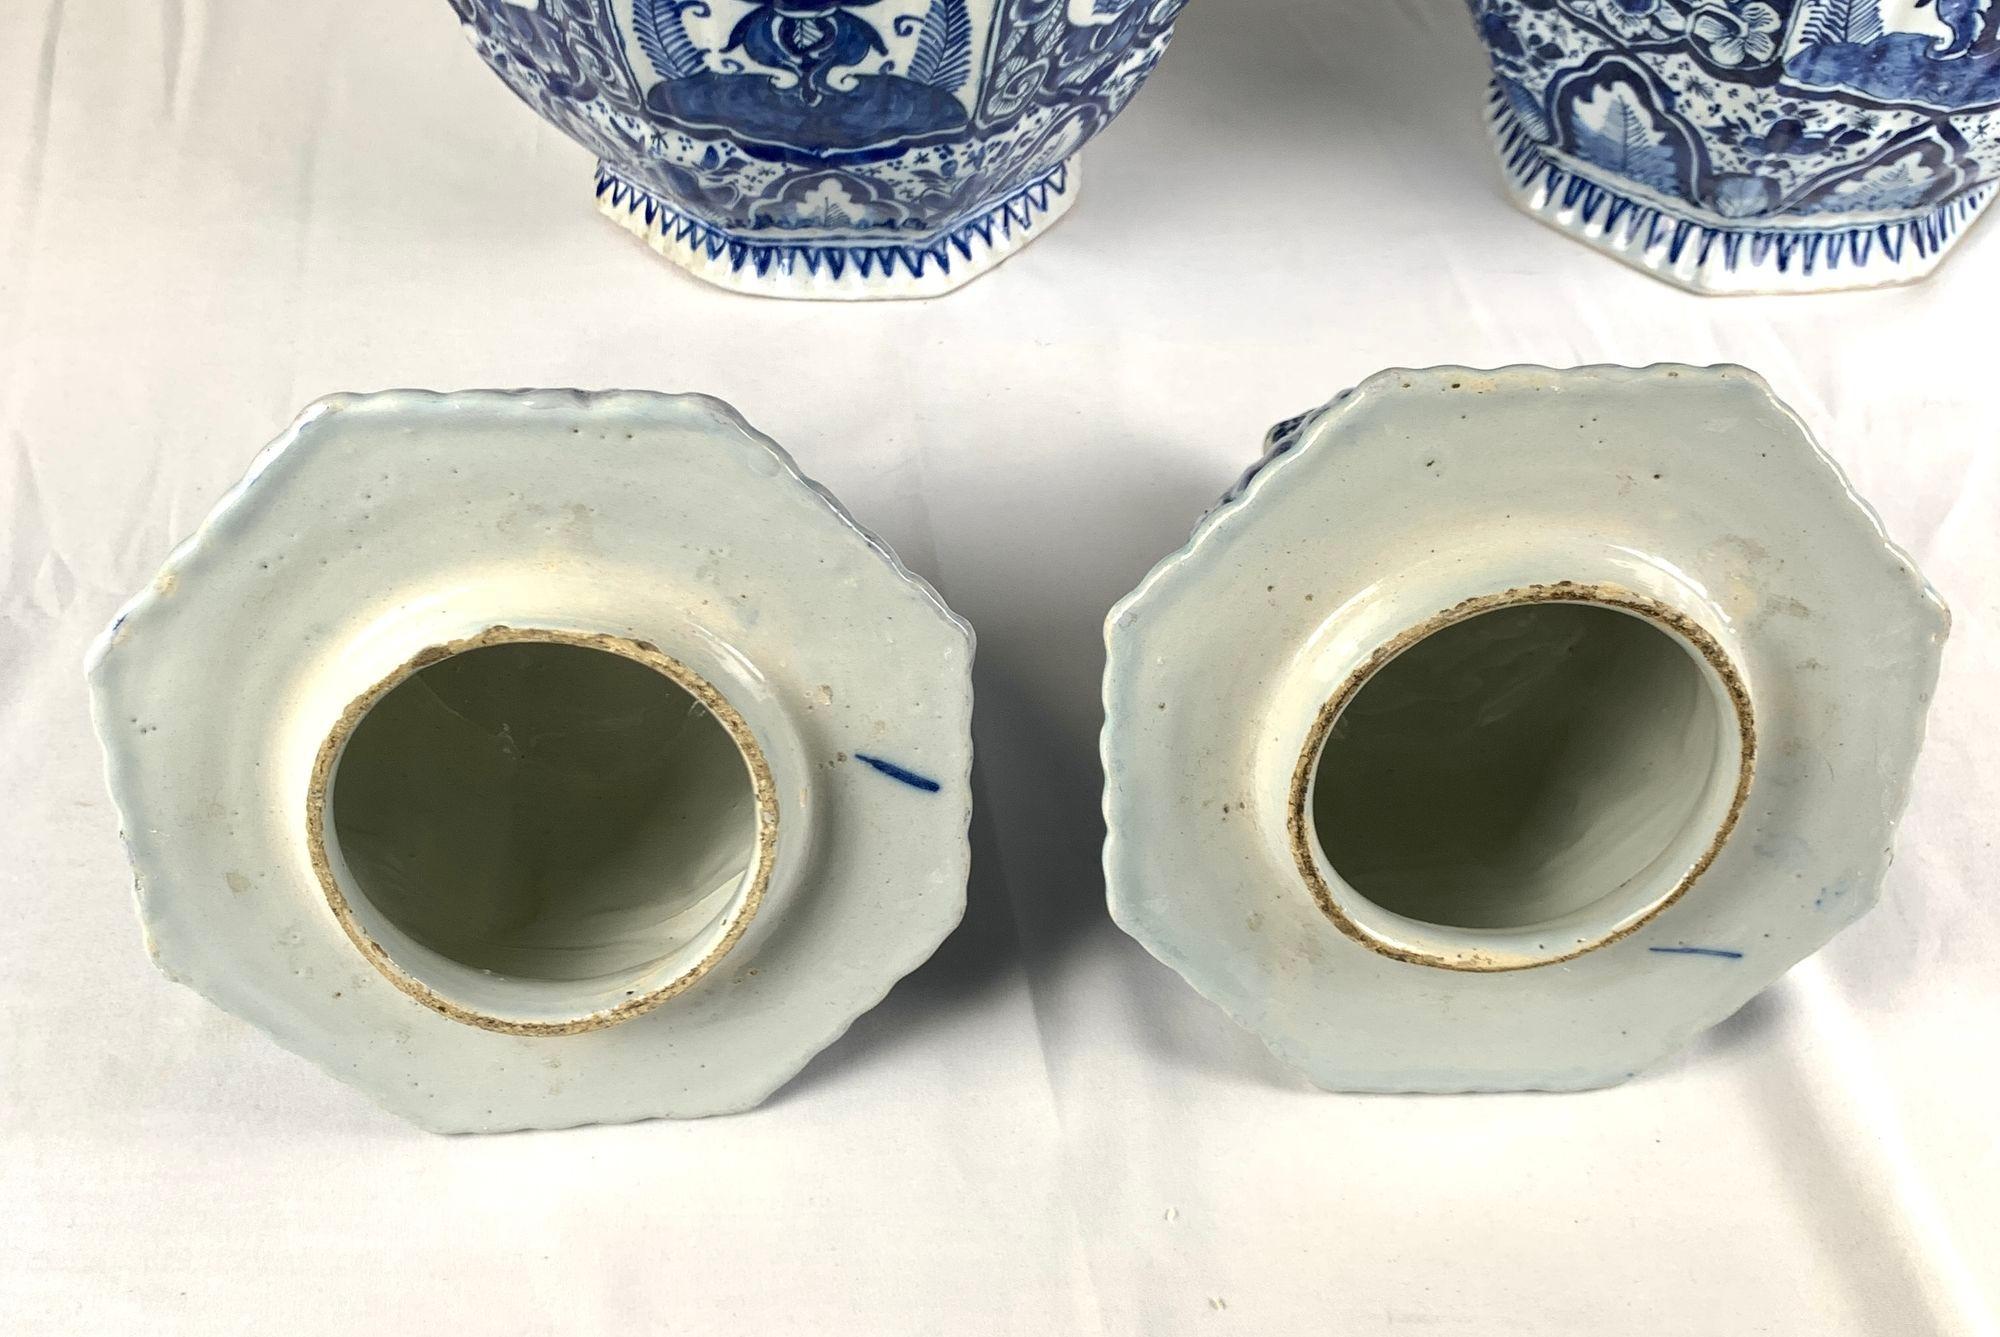 Large Blue and White Delft Jars Hand-Painted 18th Century Netherlands Circa 1780 For Sale 11